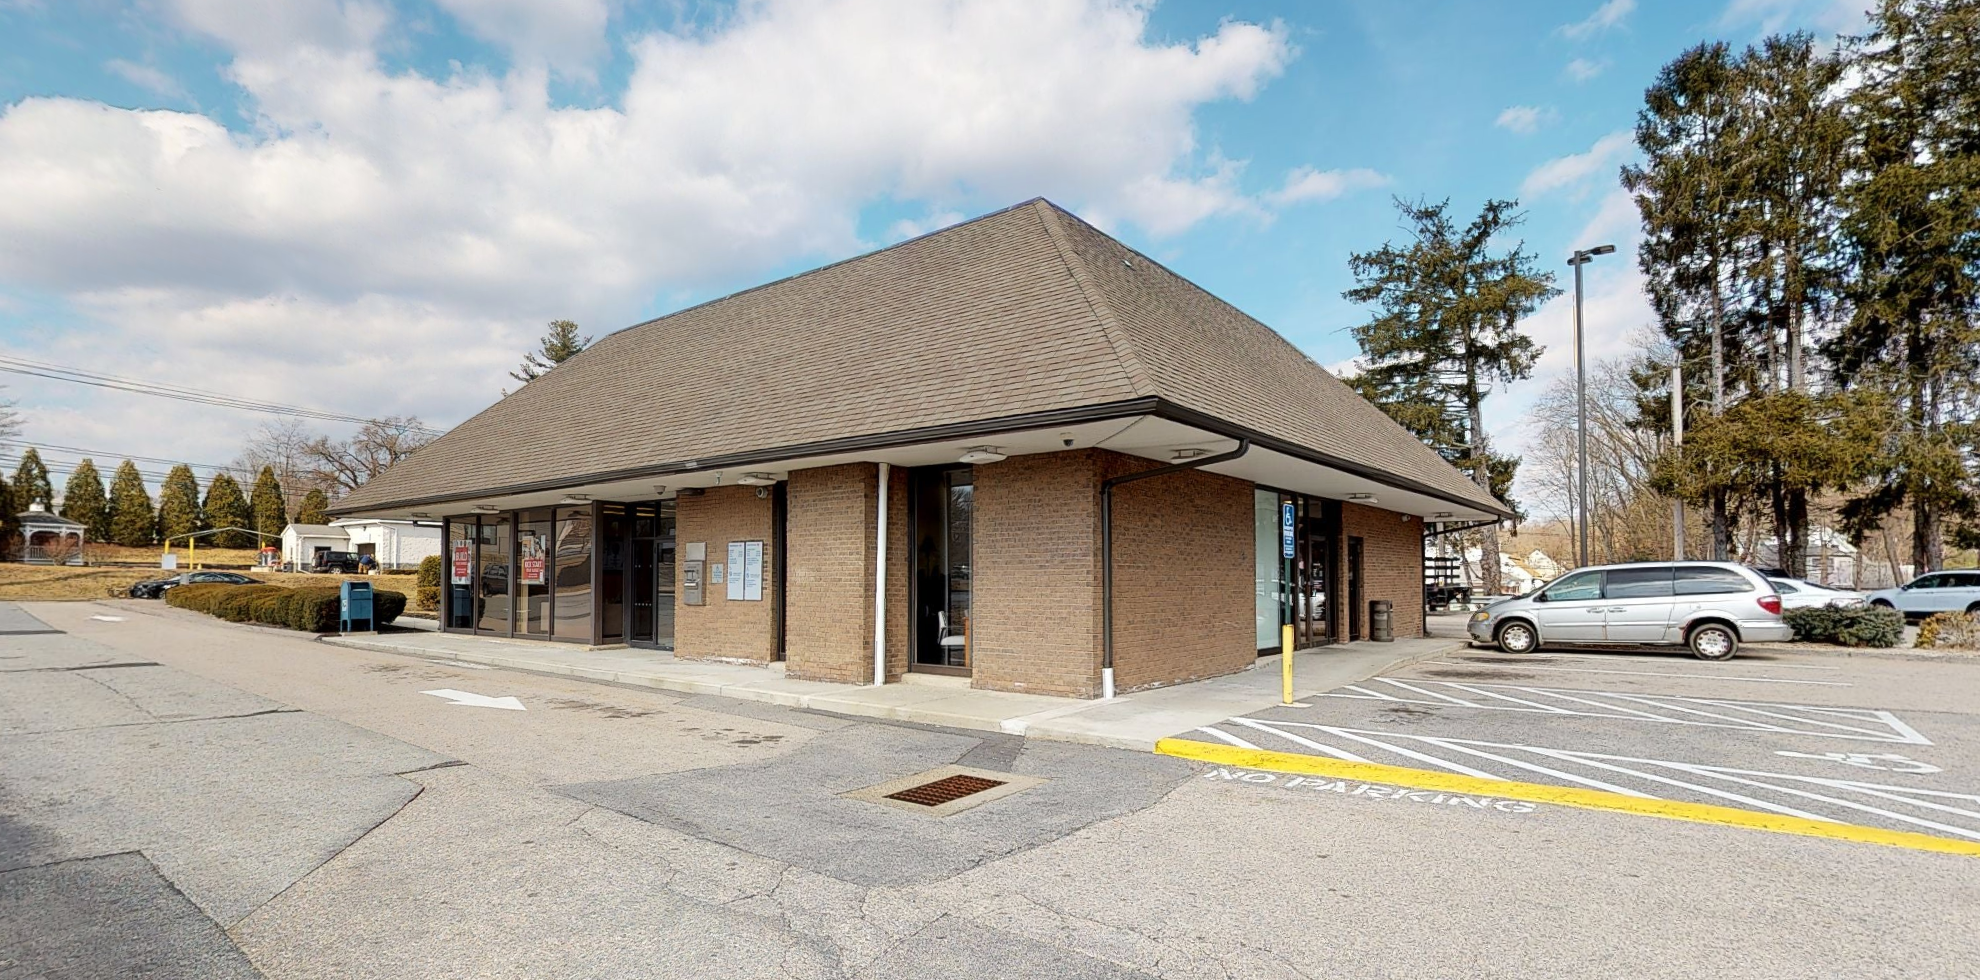 Bank of America financial center with drive-thru ATM | 590 W Main St, Norwich, CT 06360